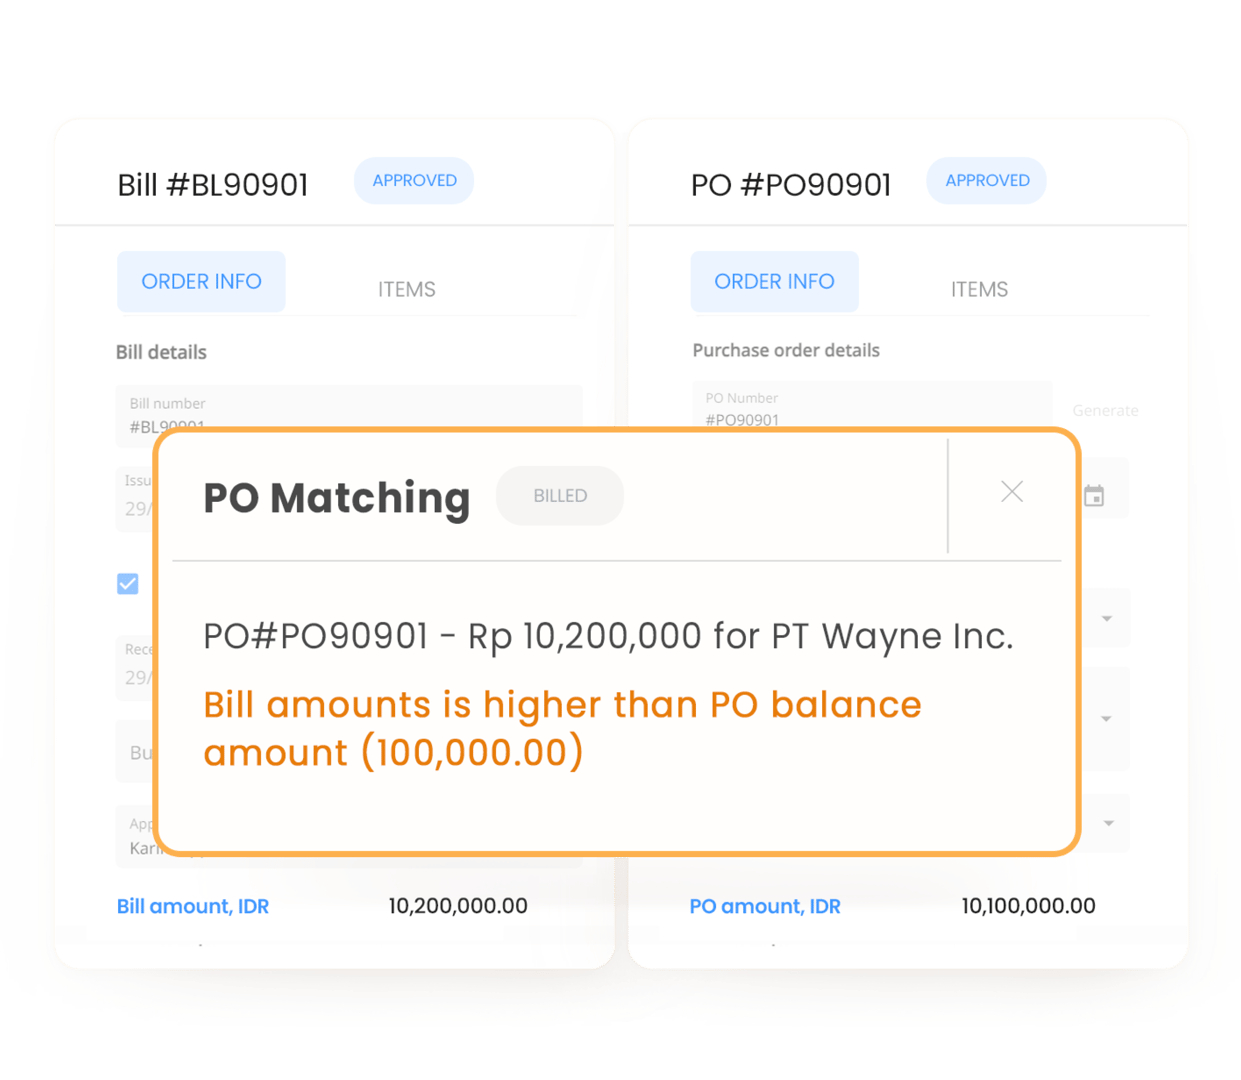 Manual purchase order matching in your accounting software can be a counterproductive activity for your finance team. With Peakflo, the purchase order will automatically match the bill and your finance team doesn't need to deal with such repetitive tasks anymore.